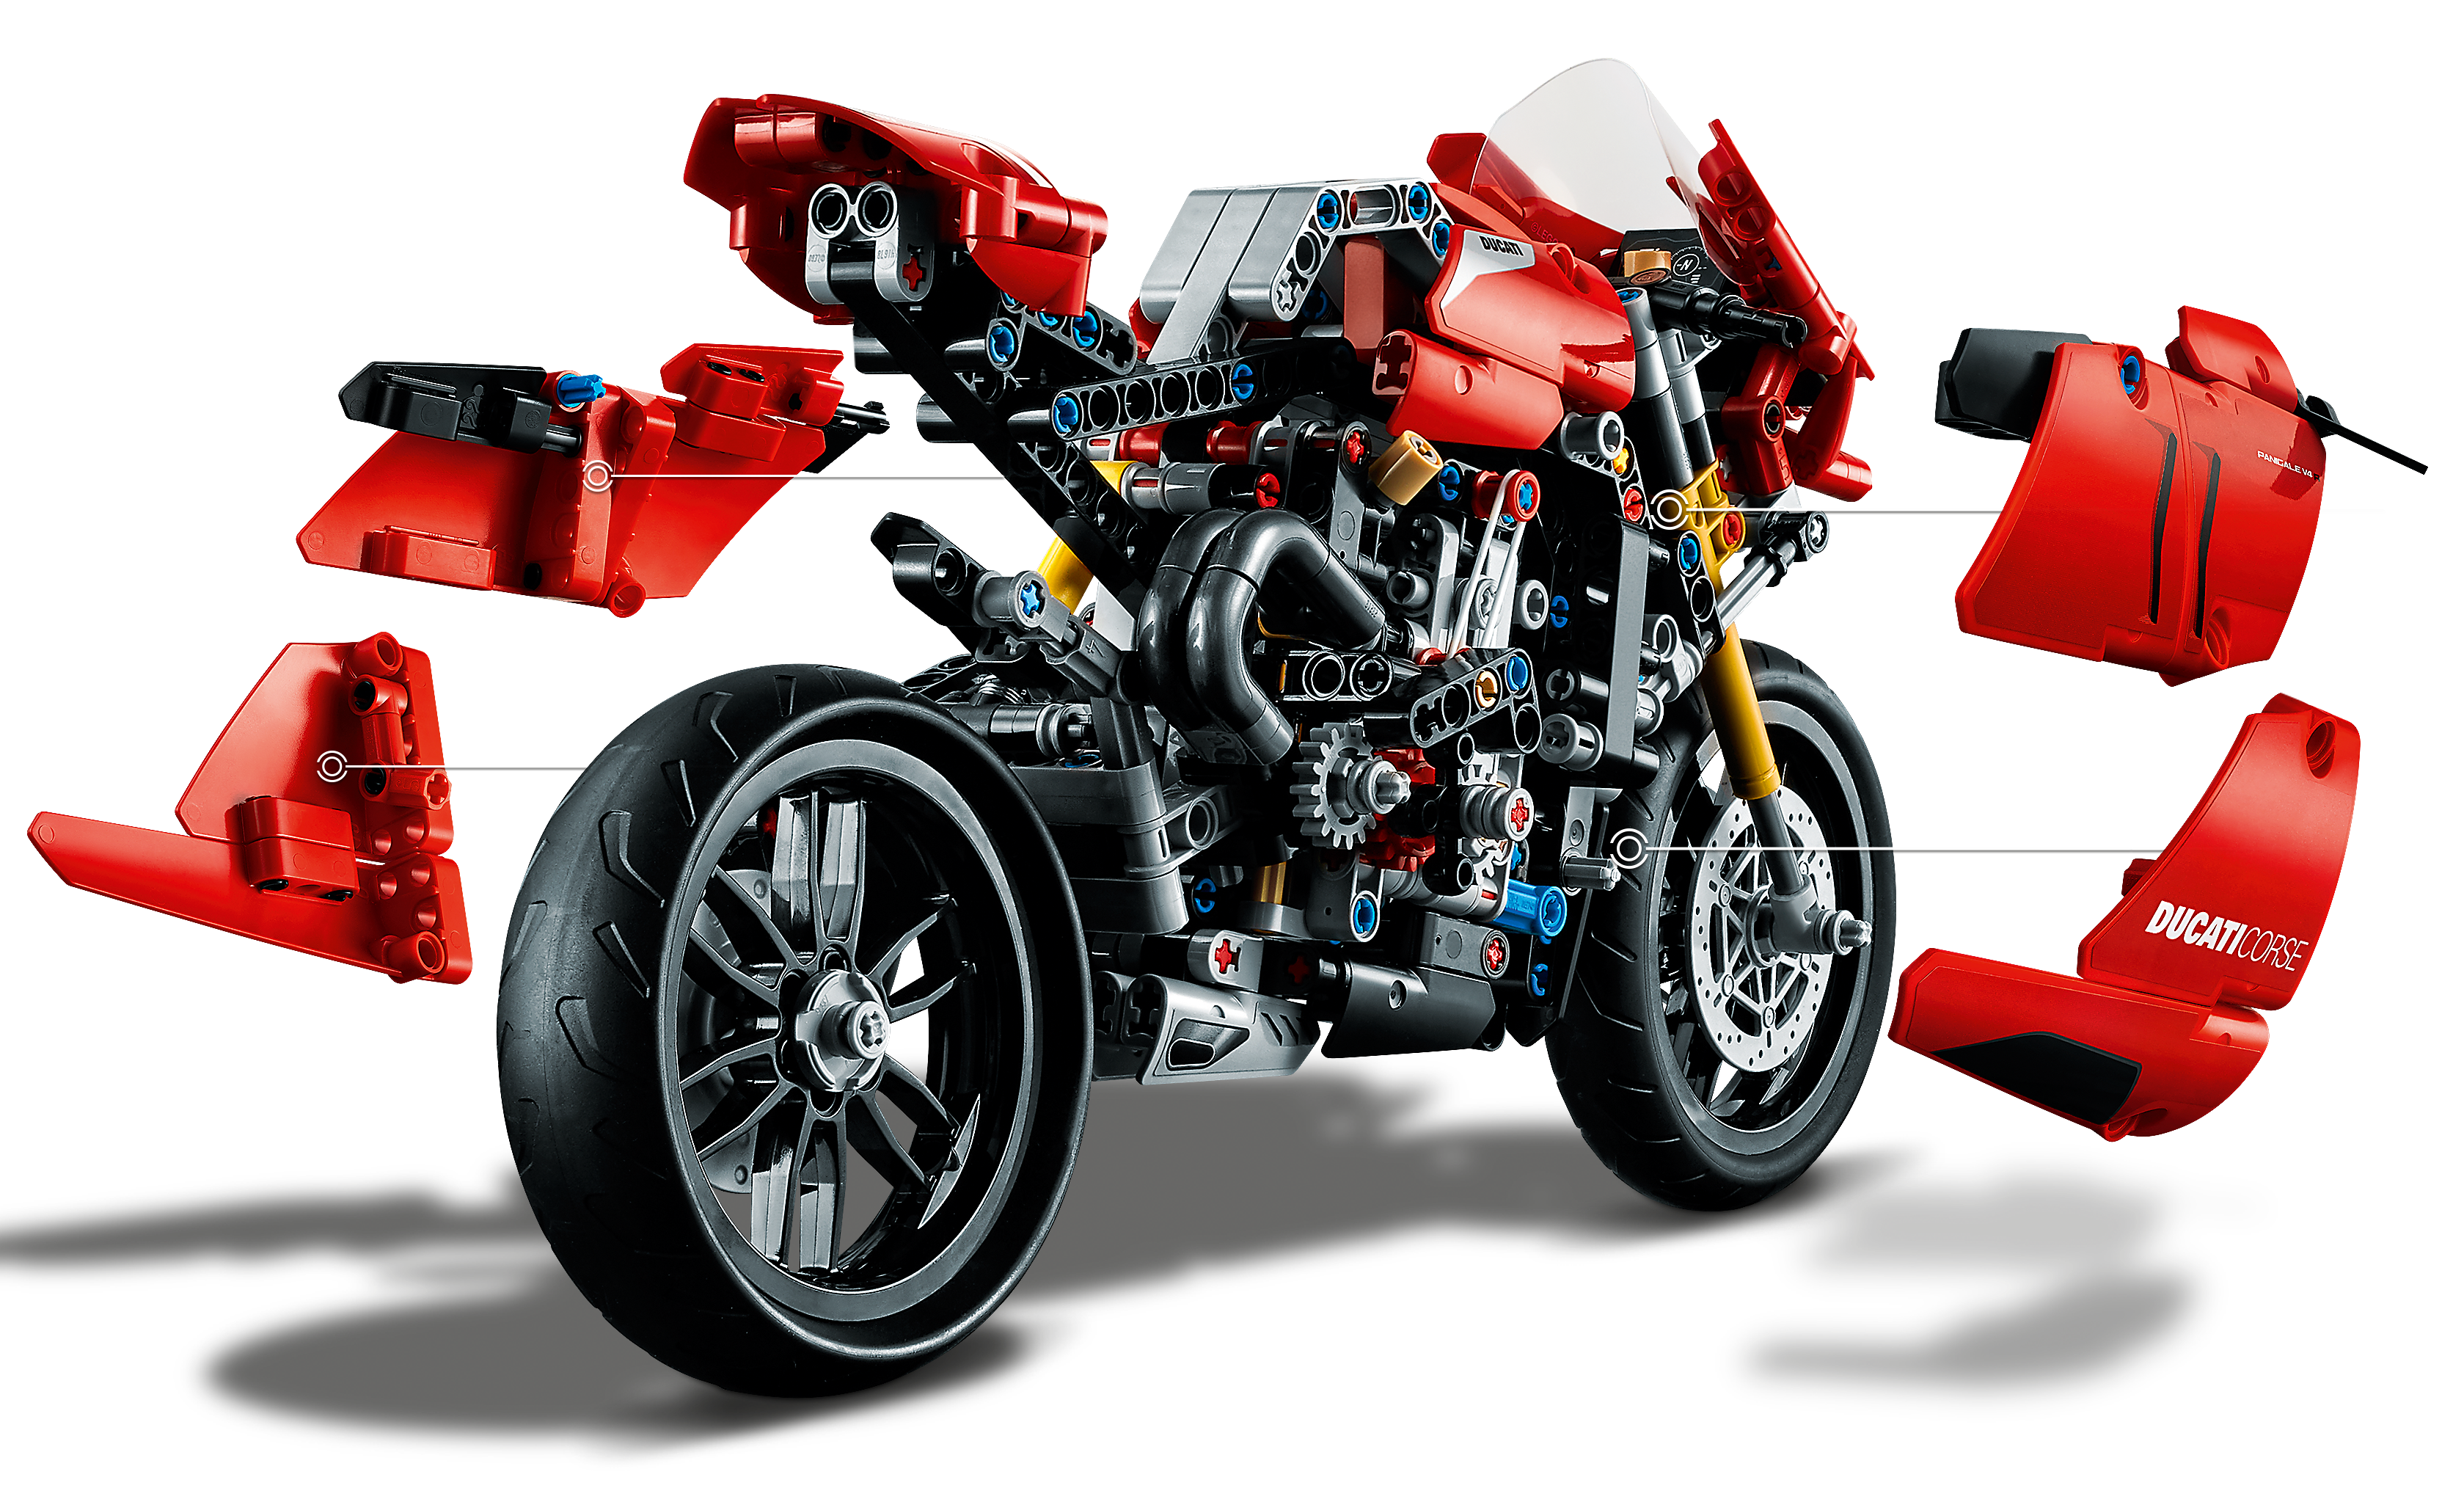 Ducati Panigale V4 R 42107 Technic Buy Online At The Official Lego Shop My